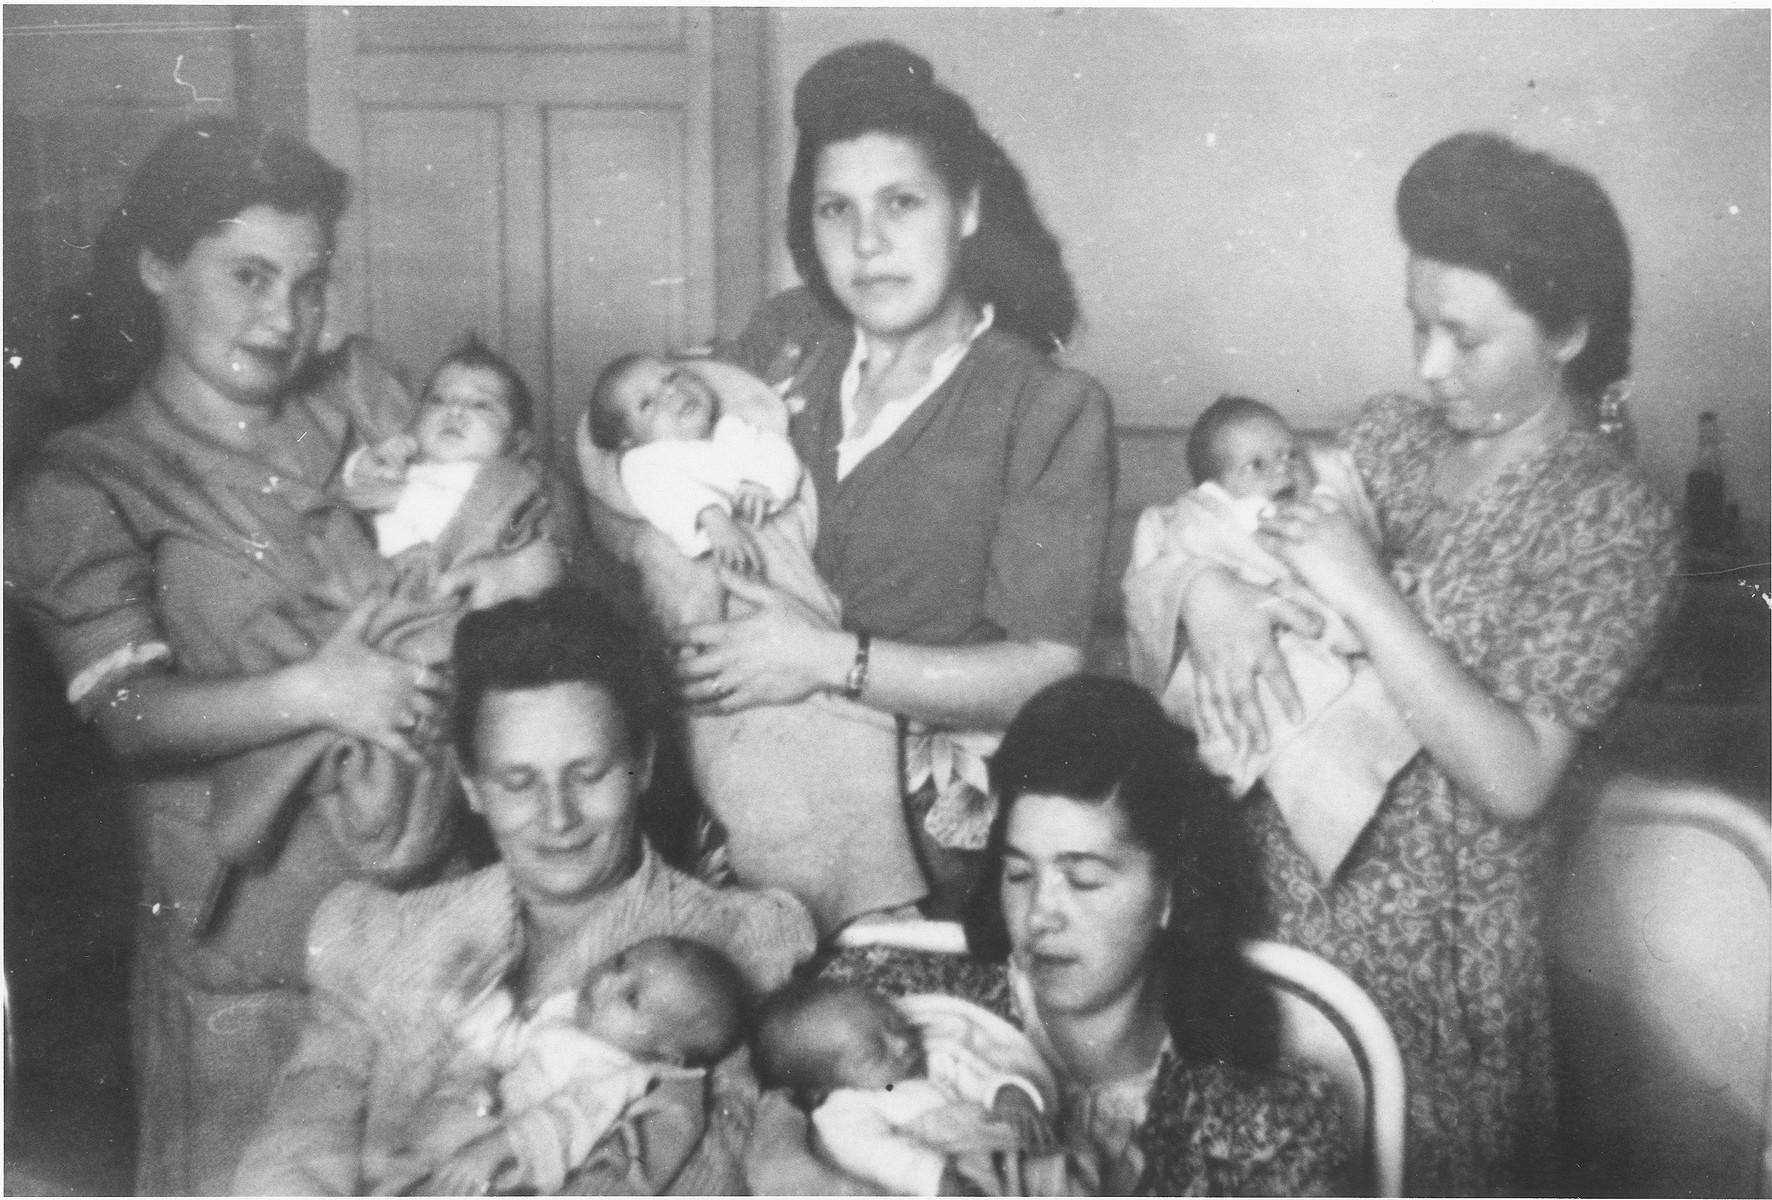 Five new mothers pose with their infants in the maternity ward of the Elizabeth Hospital in the Feldafing displaced persons camp.

Among those pictured is Zlata (Distel) Malcmacher holding Rascha Riwka (top left).